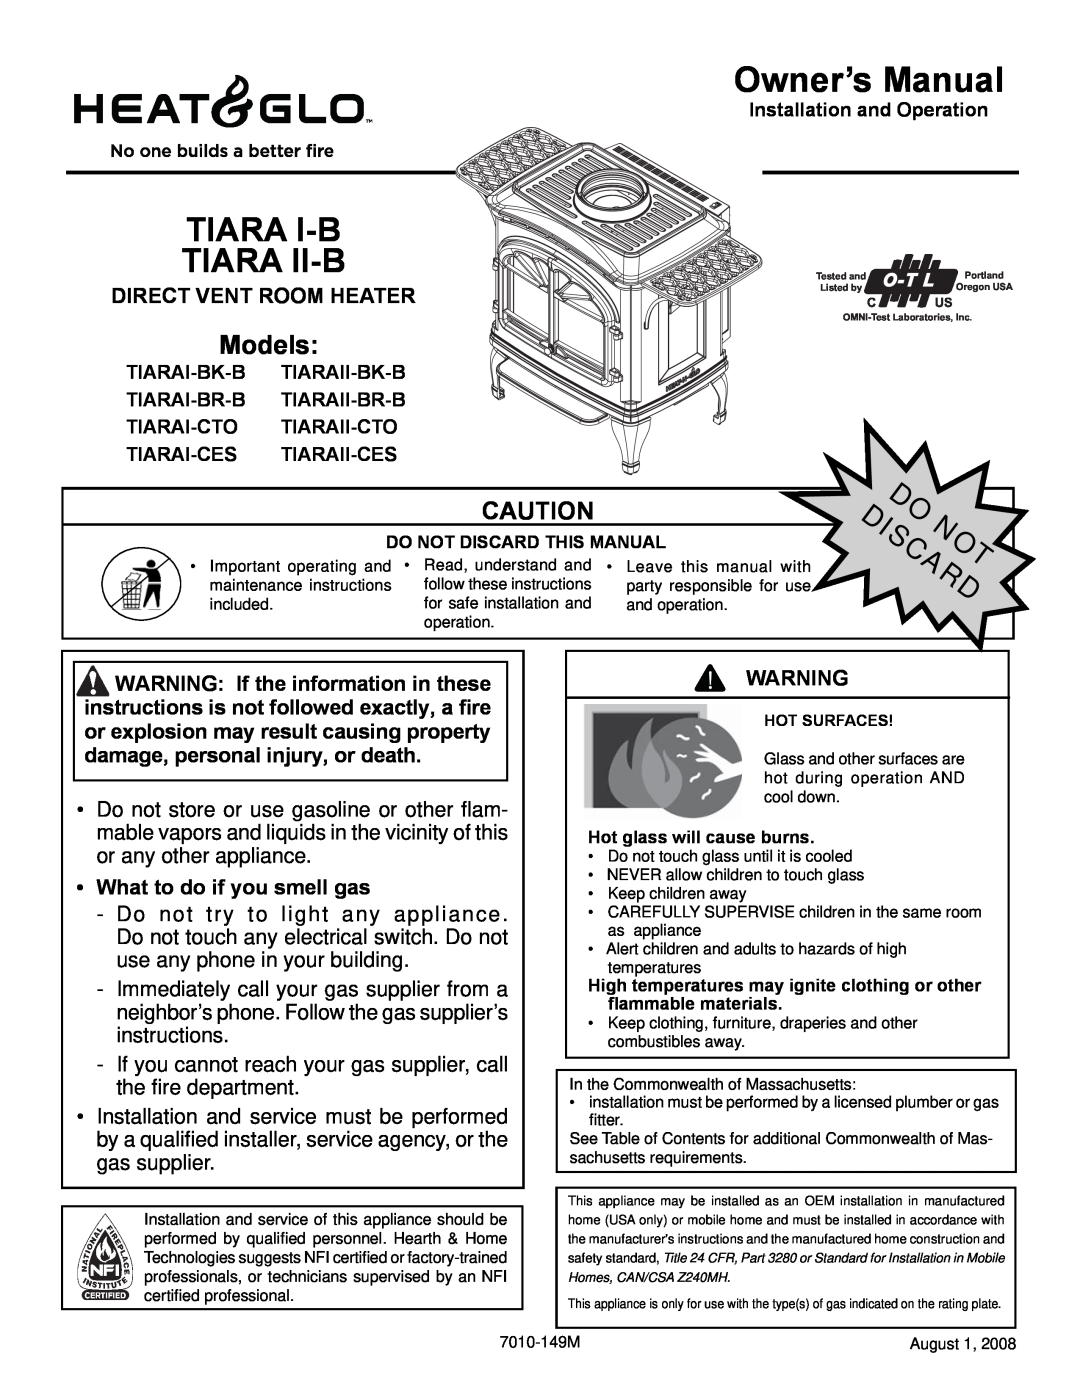 Hearth and Home Technologies TIARA II-B owner manual Owner’s Manual, Direct Vent Room Heater, What to do if you smell gas 